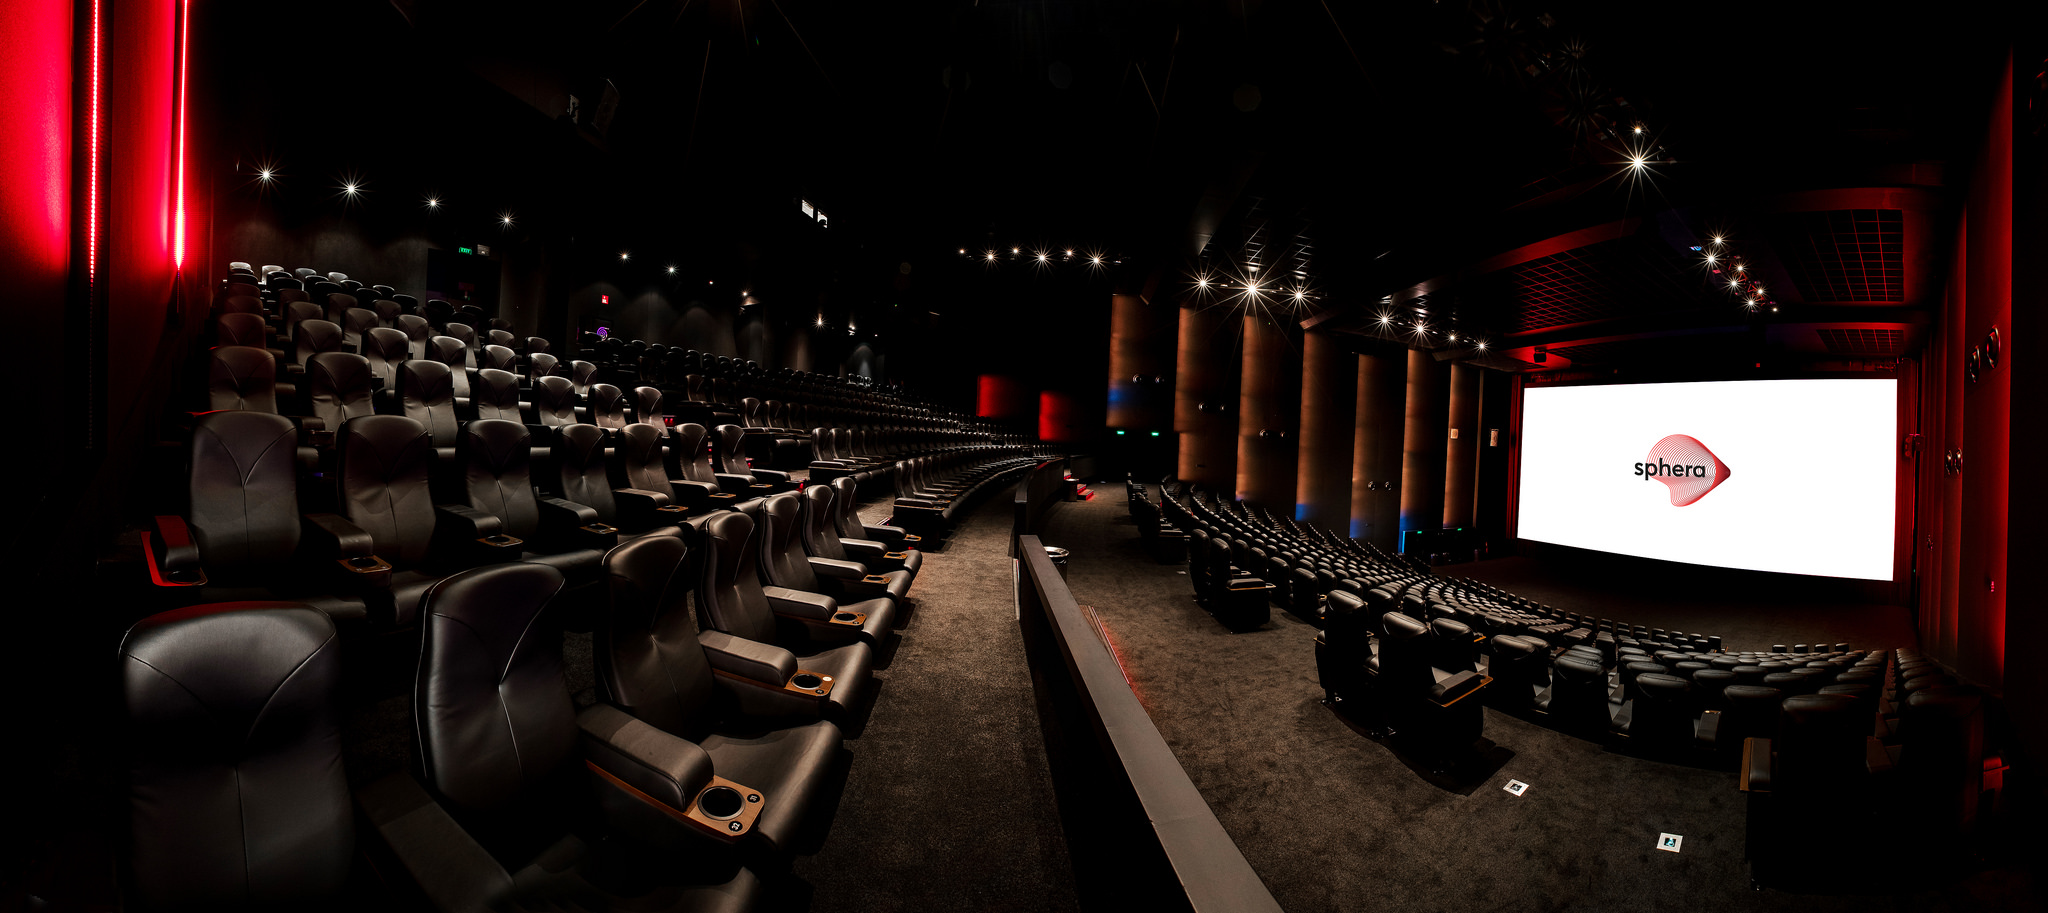 CinemaNext Creates an Immersive Cinematic Experience in the New Sphere Theater with Martin By HARMAN